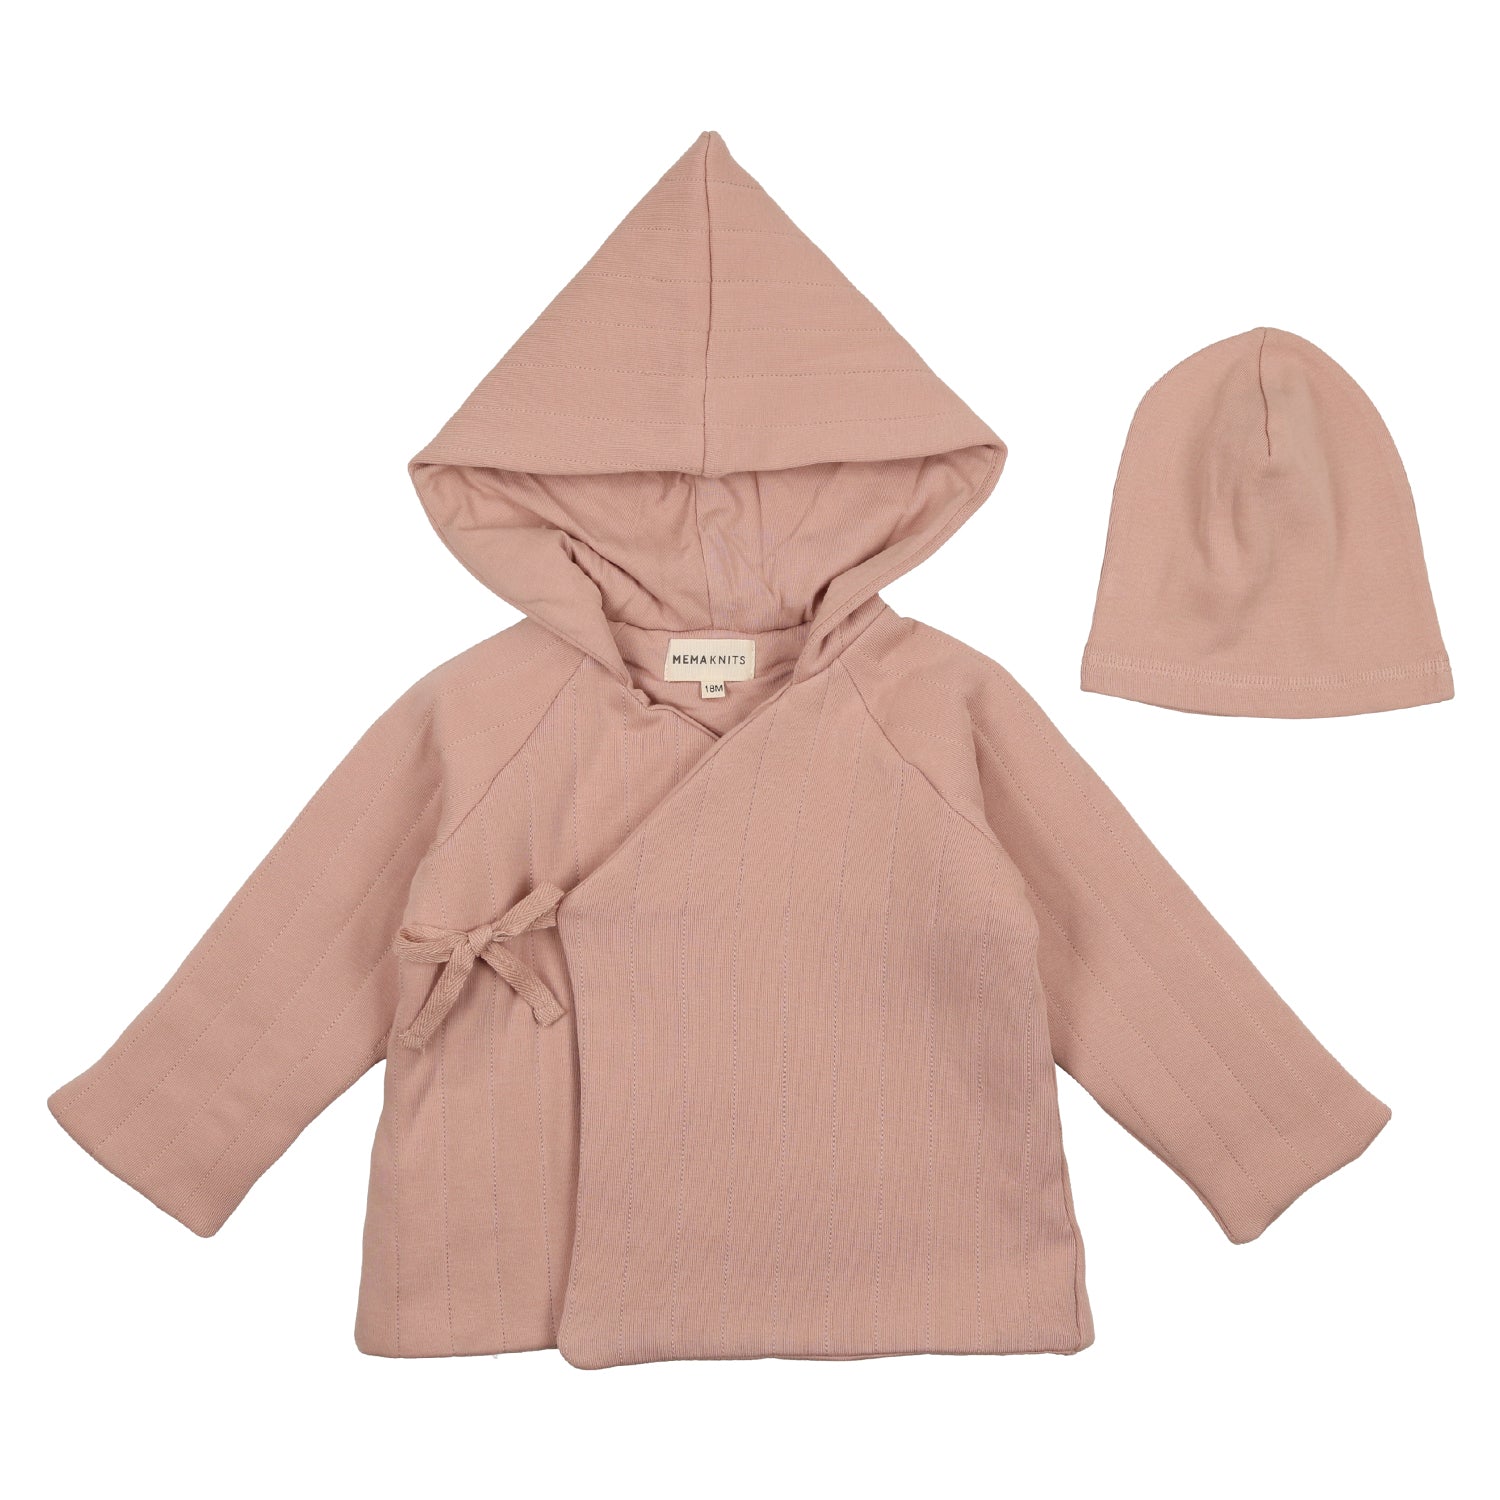 Mema Knits Jacket With Beanie - Old Rose